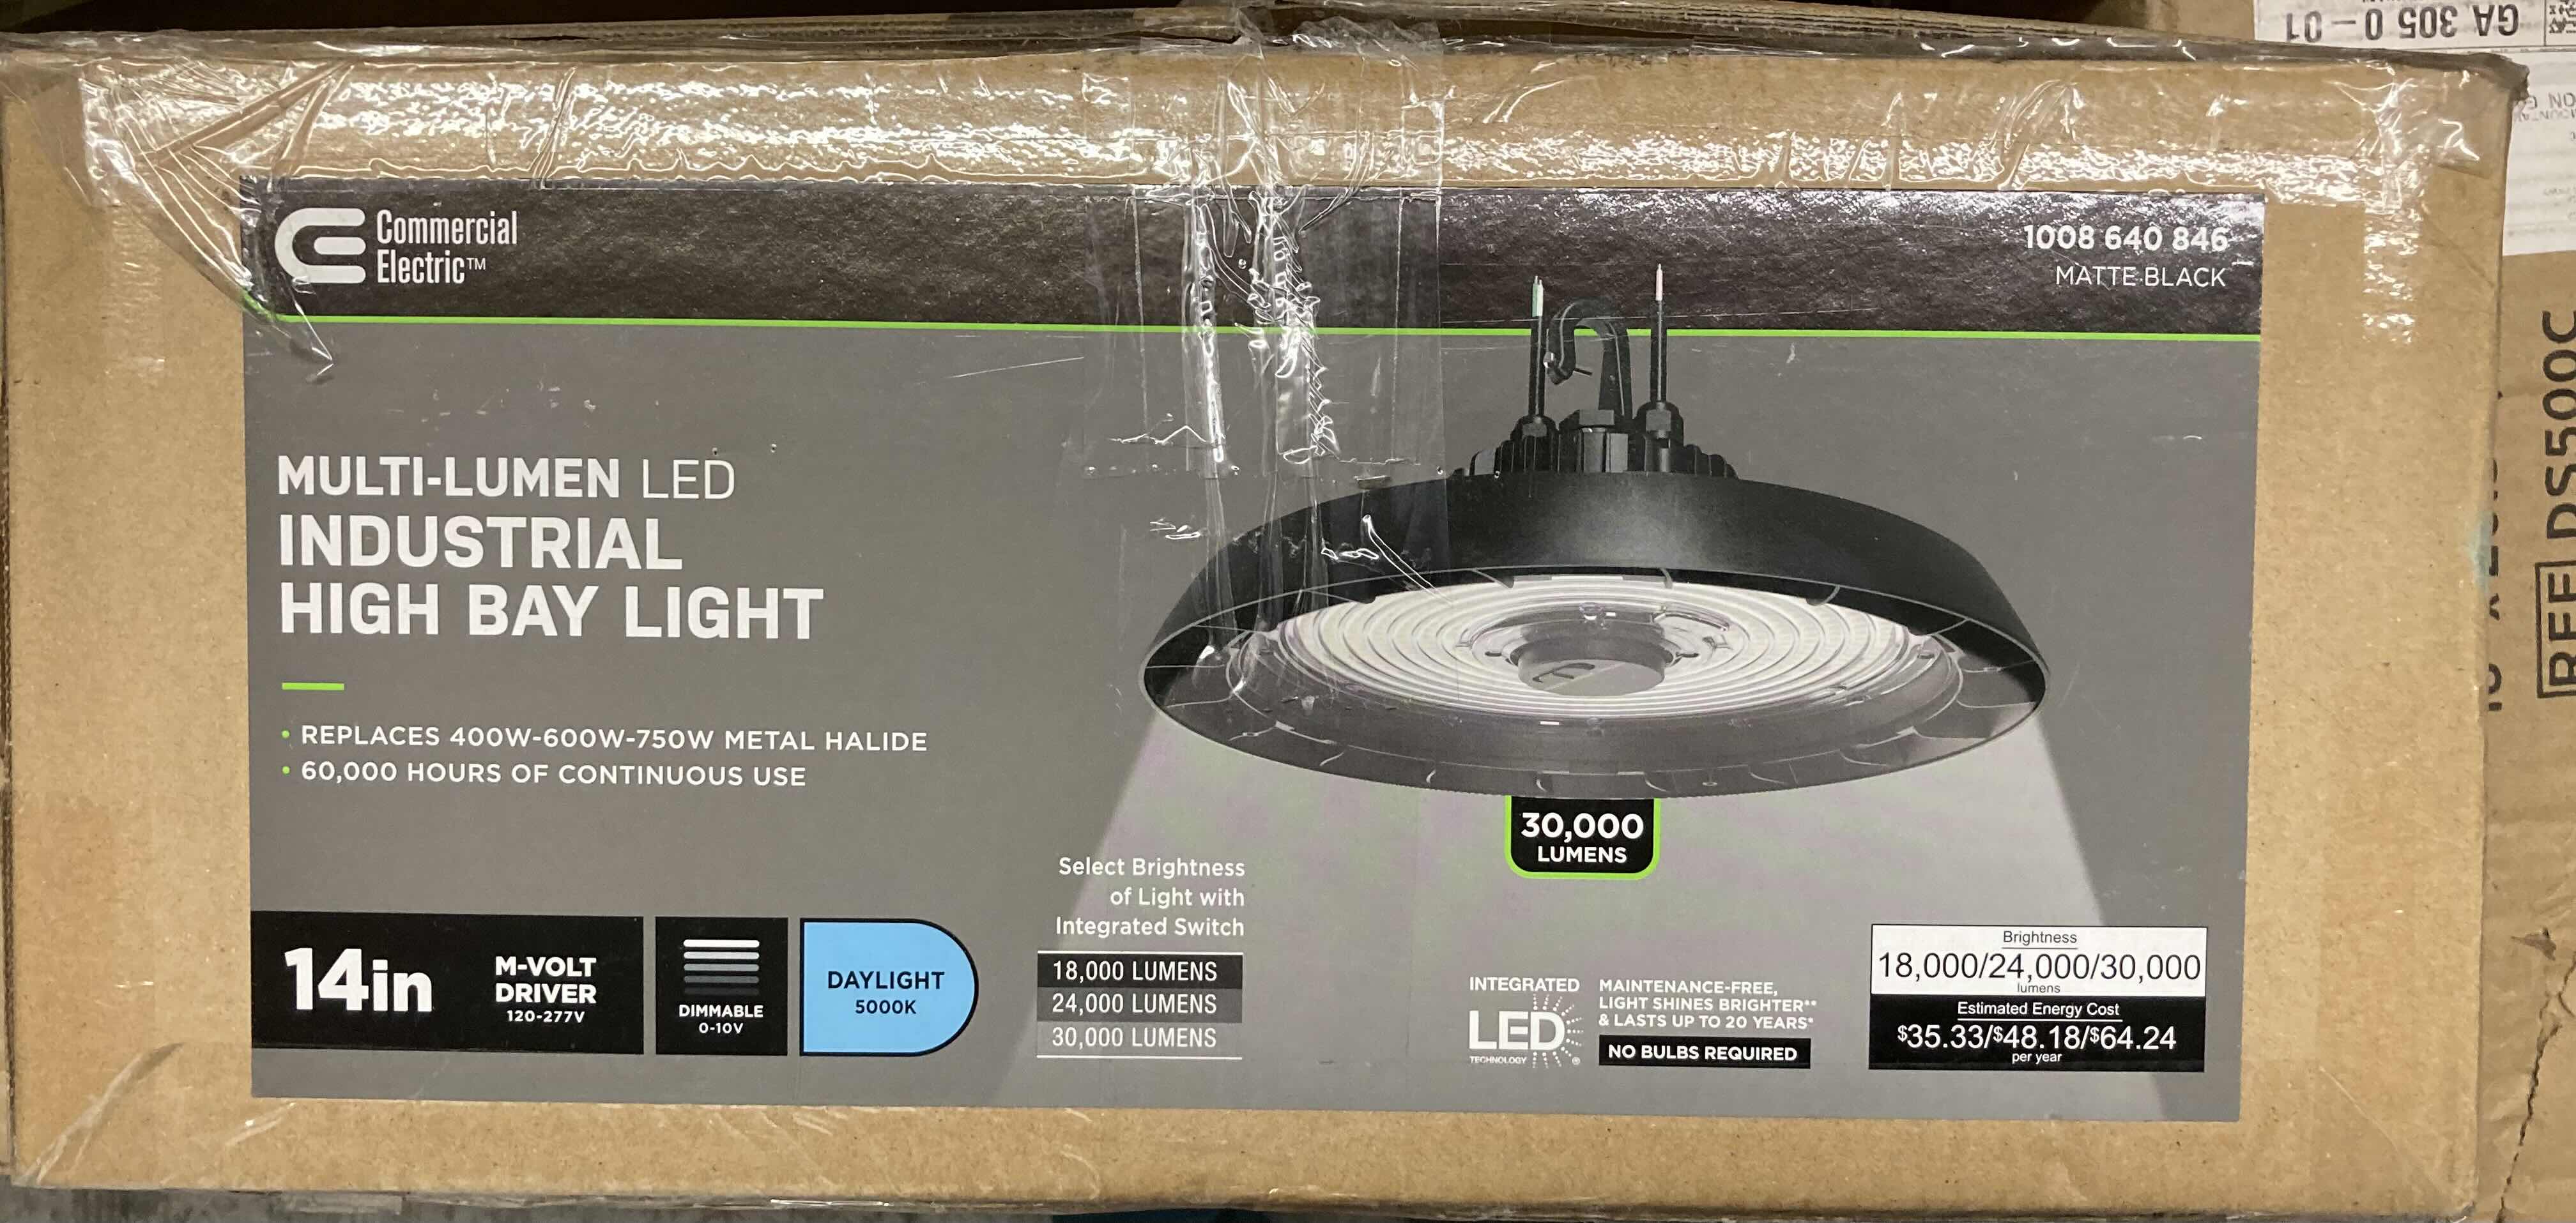 Photo 6 of COMMERCIAL ELECTRIC 14” BLACK INTEGRATED LED 5000K HIGH BAY LIGHT 30,000 LUMENS MODEL HLF-HD08a-200